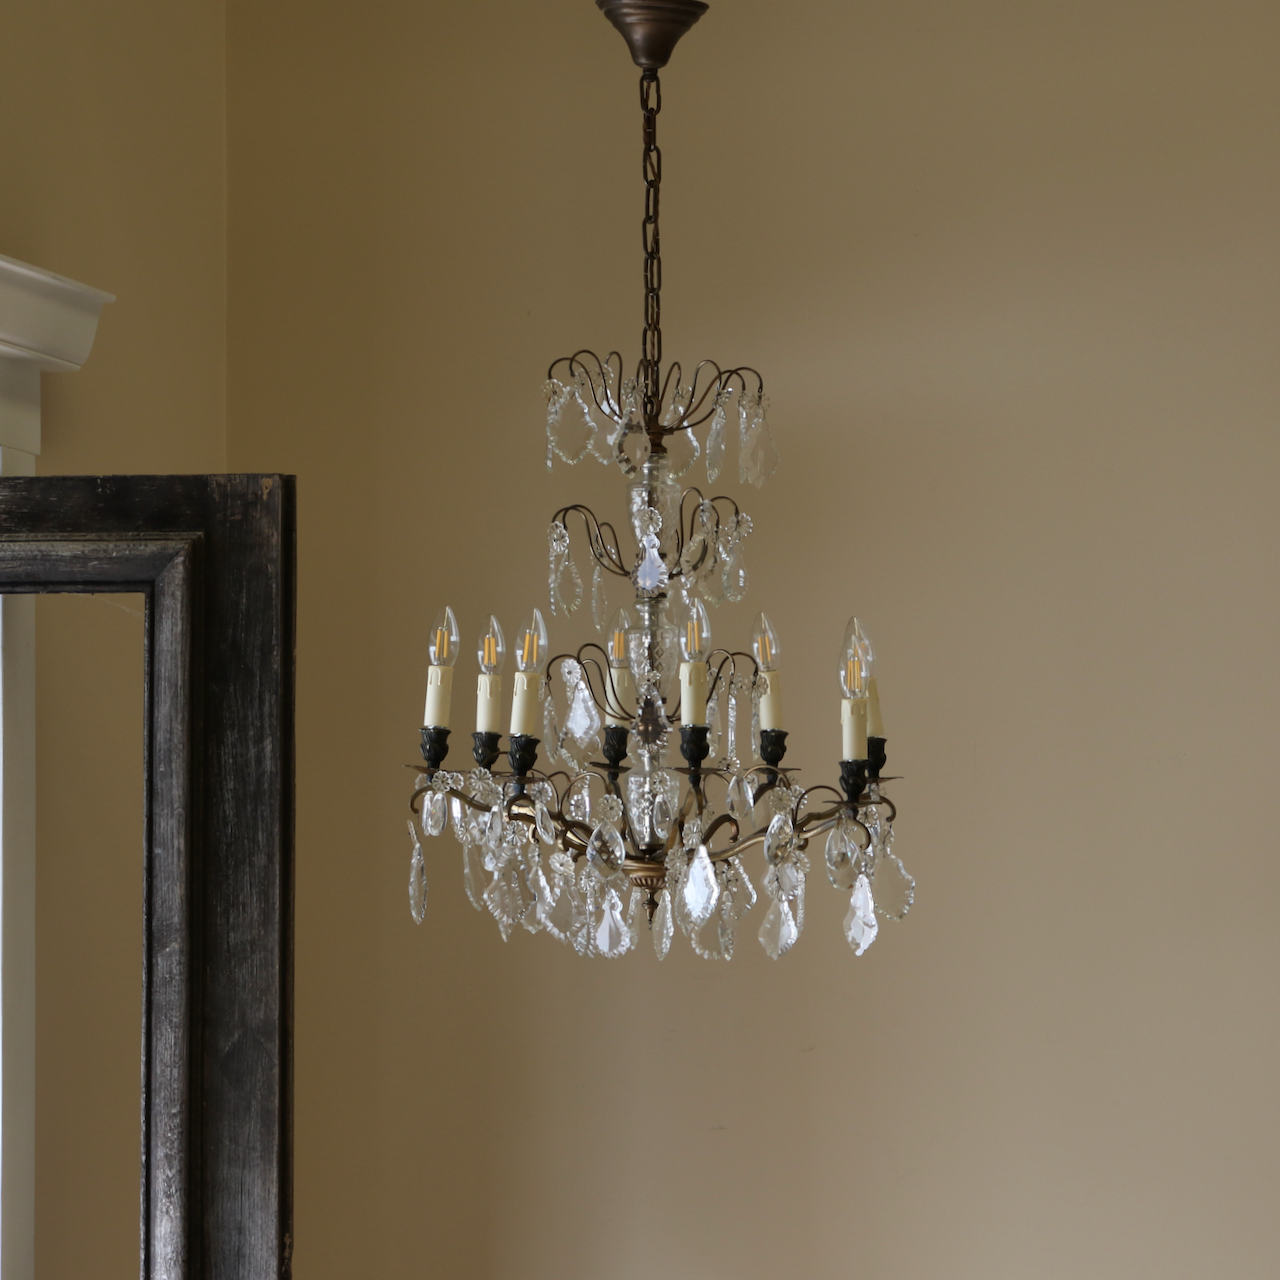 136-30 - French Eight Light Chandelier